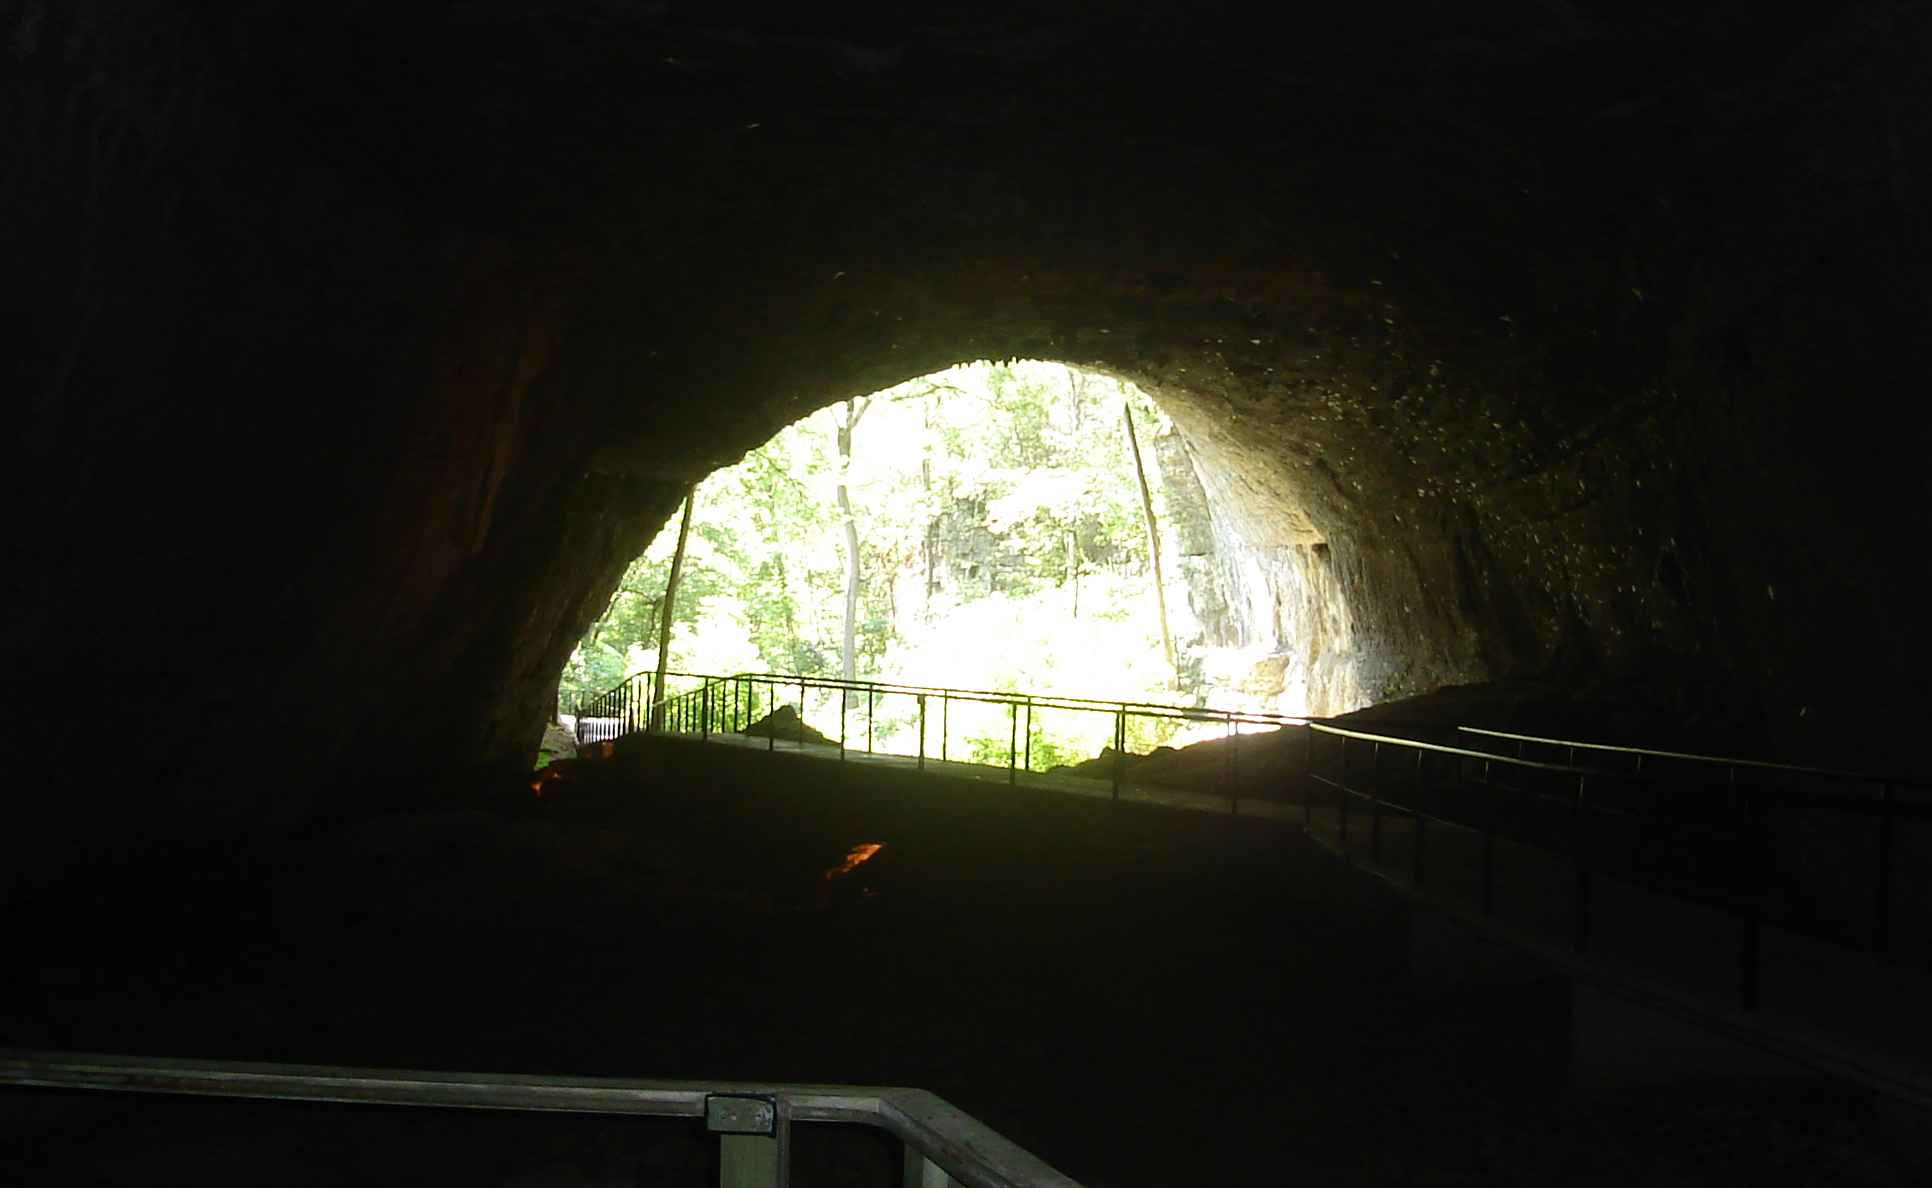 Smallin Cave entrance from inside the cave